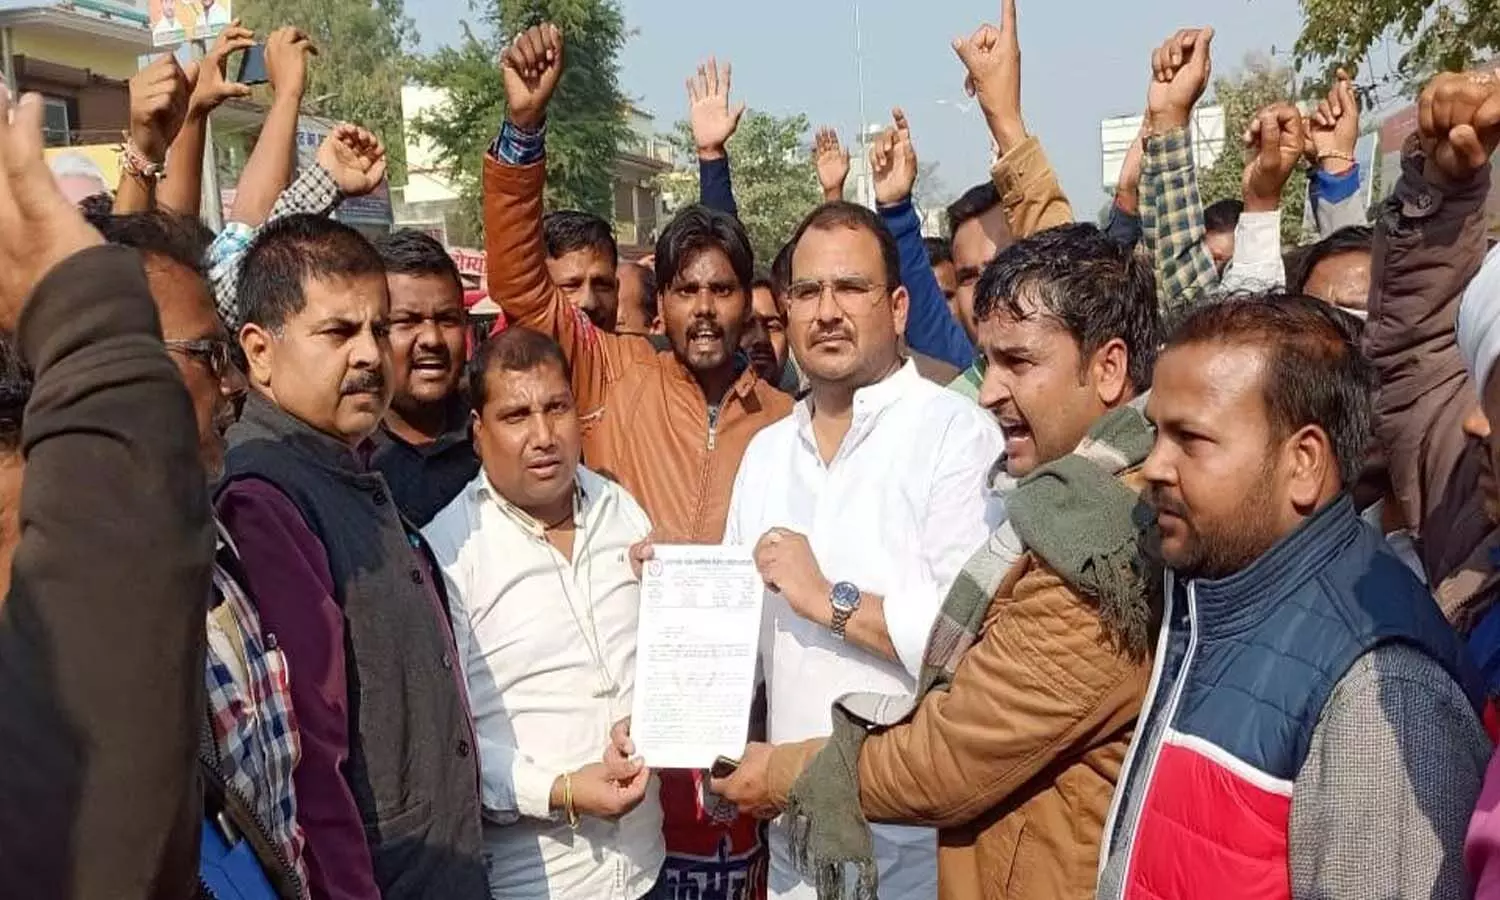 Gonda News: The agitated employees no longer trust the government, have faith in them, have reached home